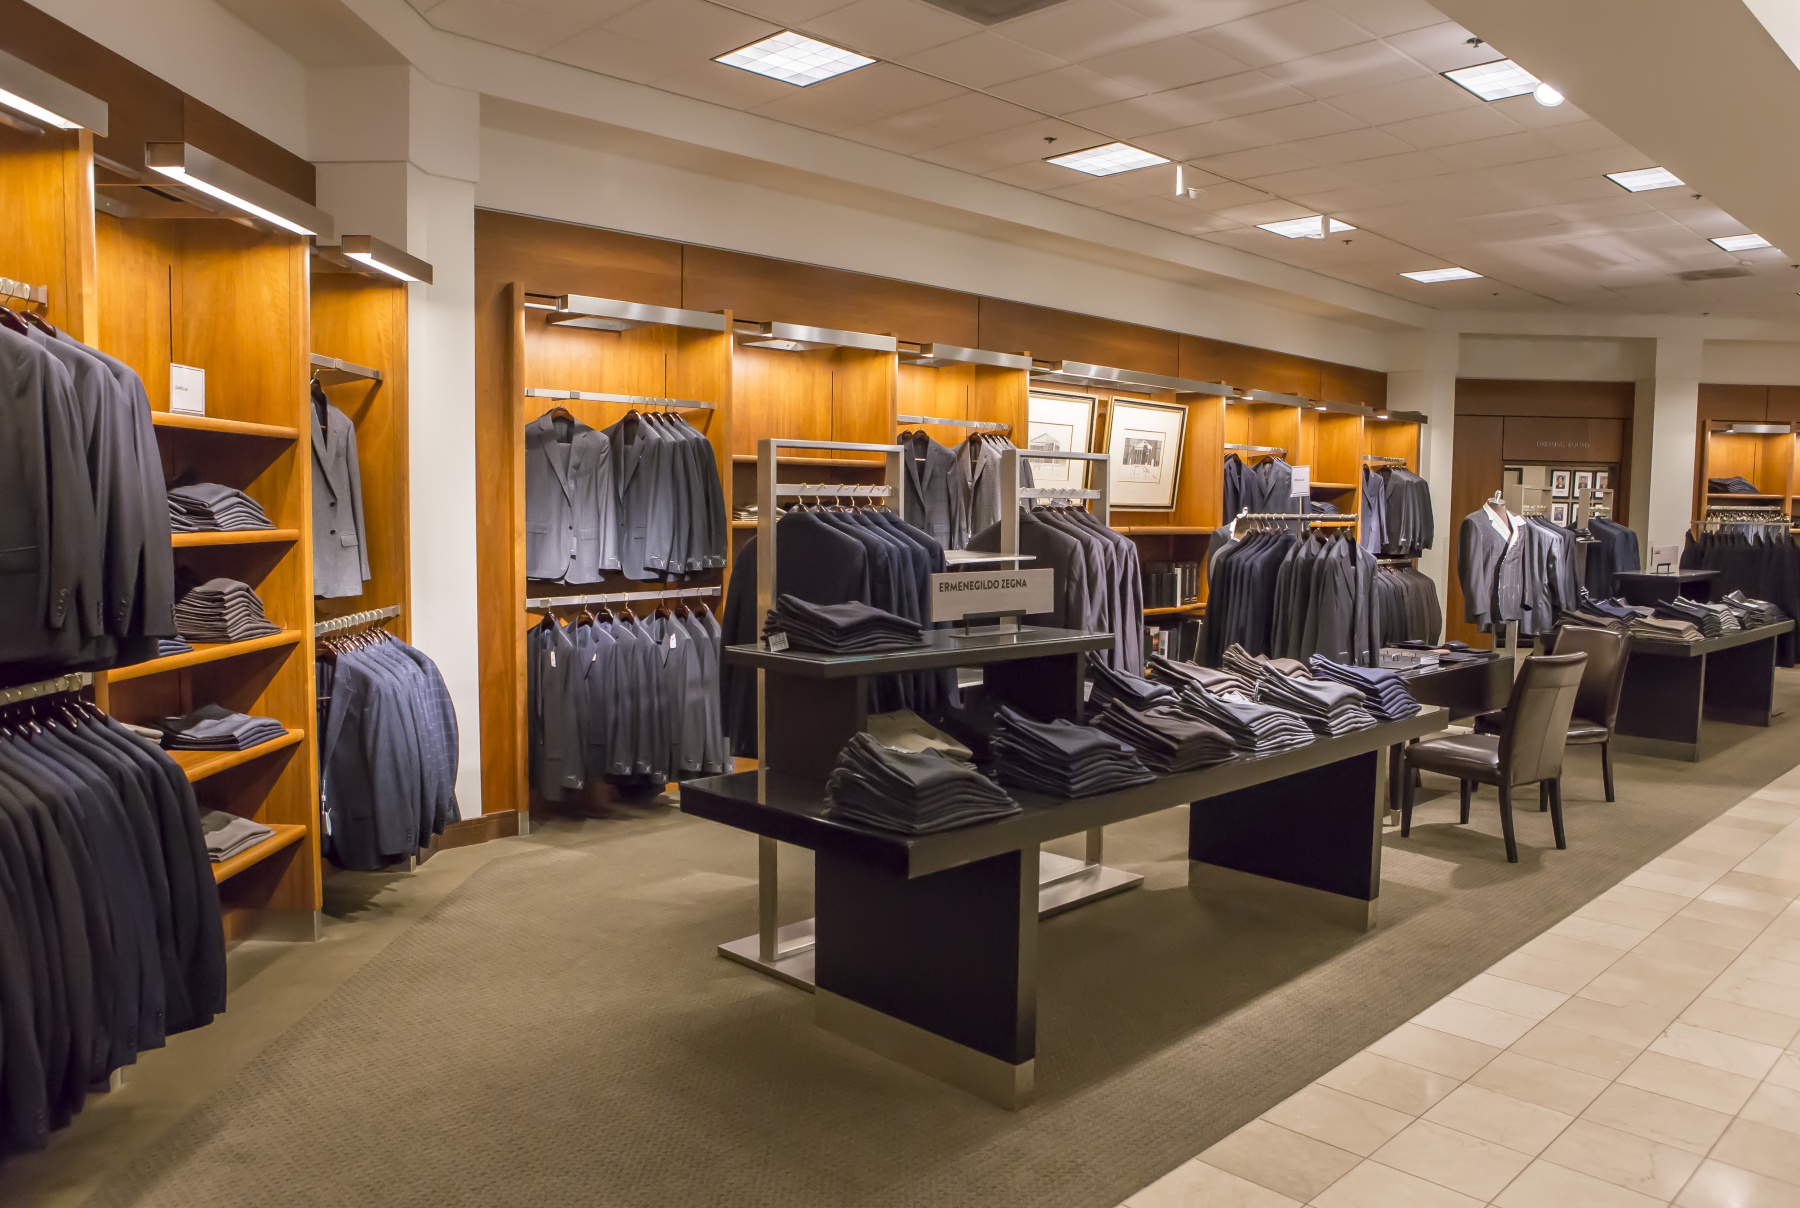 Nationwide Fixture Installations Inc Macy's Case Study Millwork Packages Retail Rollouts Shop-in-Shop Program Management Site Surveys Signage Custom Installation Services